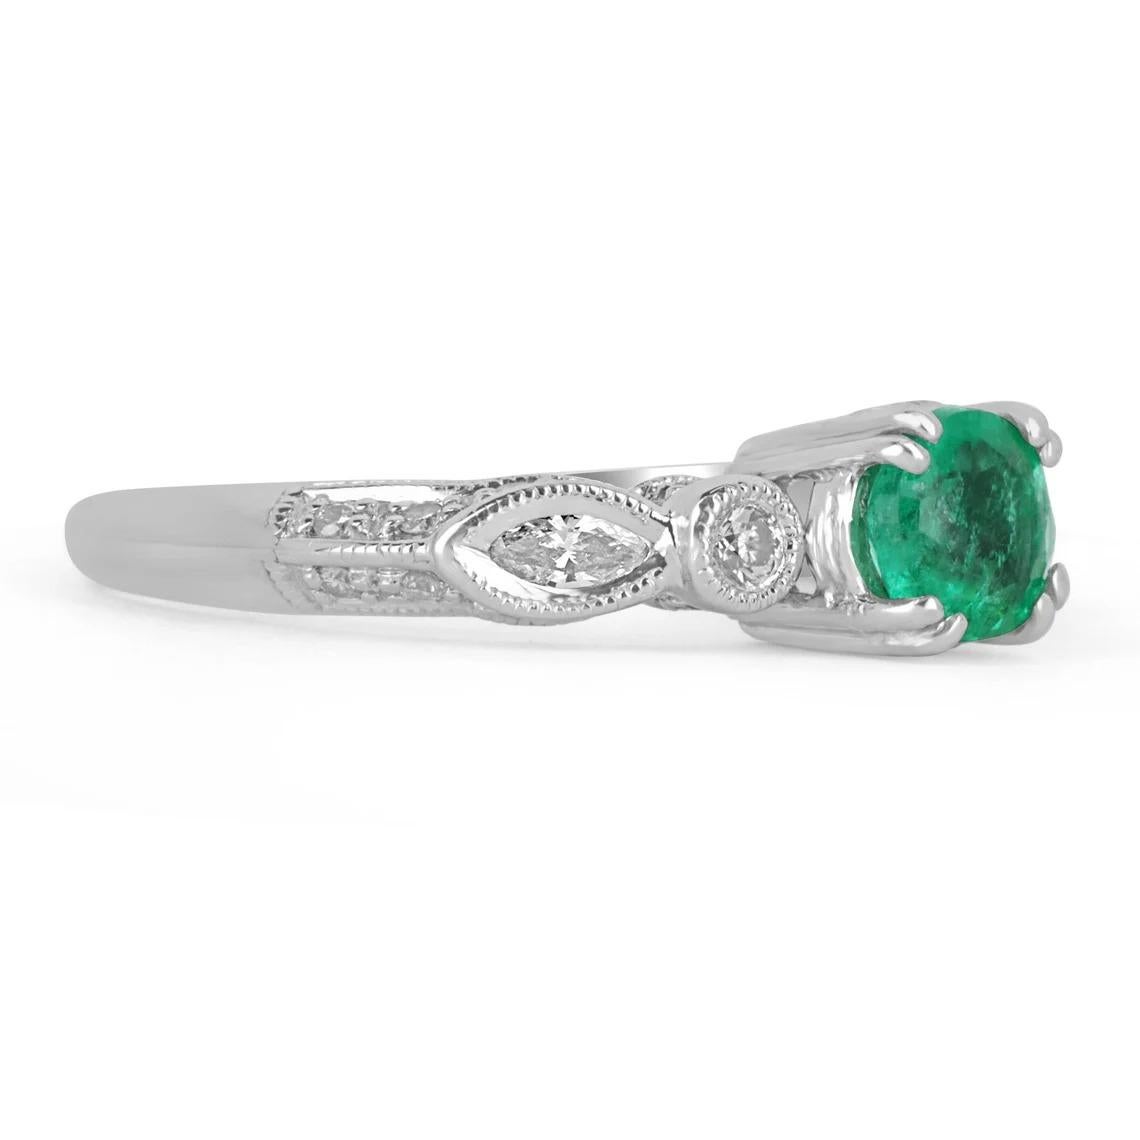 Setting Style: Prong/Pave/Bezel
Setting Material: 14K White Gold
Weight: 3.6 Grams

Main Stone: Emerald
Shape: Round Cut
Approx Weight: 0.80-Carats
Clarity: Transparent
Color: Vivid Green
Luster: Excellent
Treatments: Natural, Oiling
Origin: